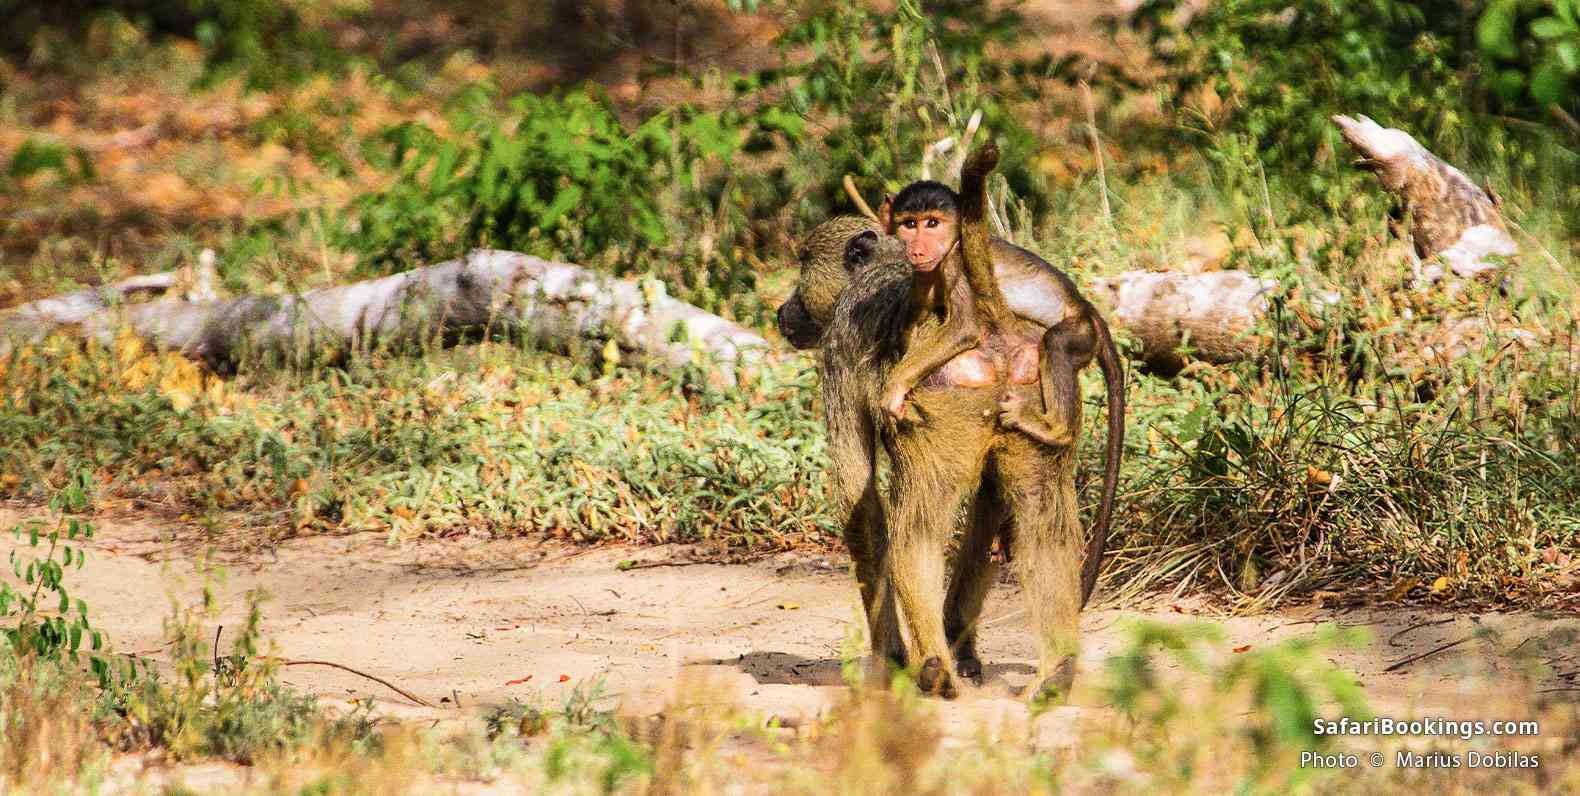 Baby baboon on his mother's back, Arabuko Sokoke Forest Reserve